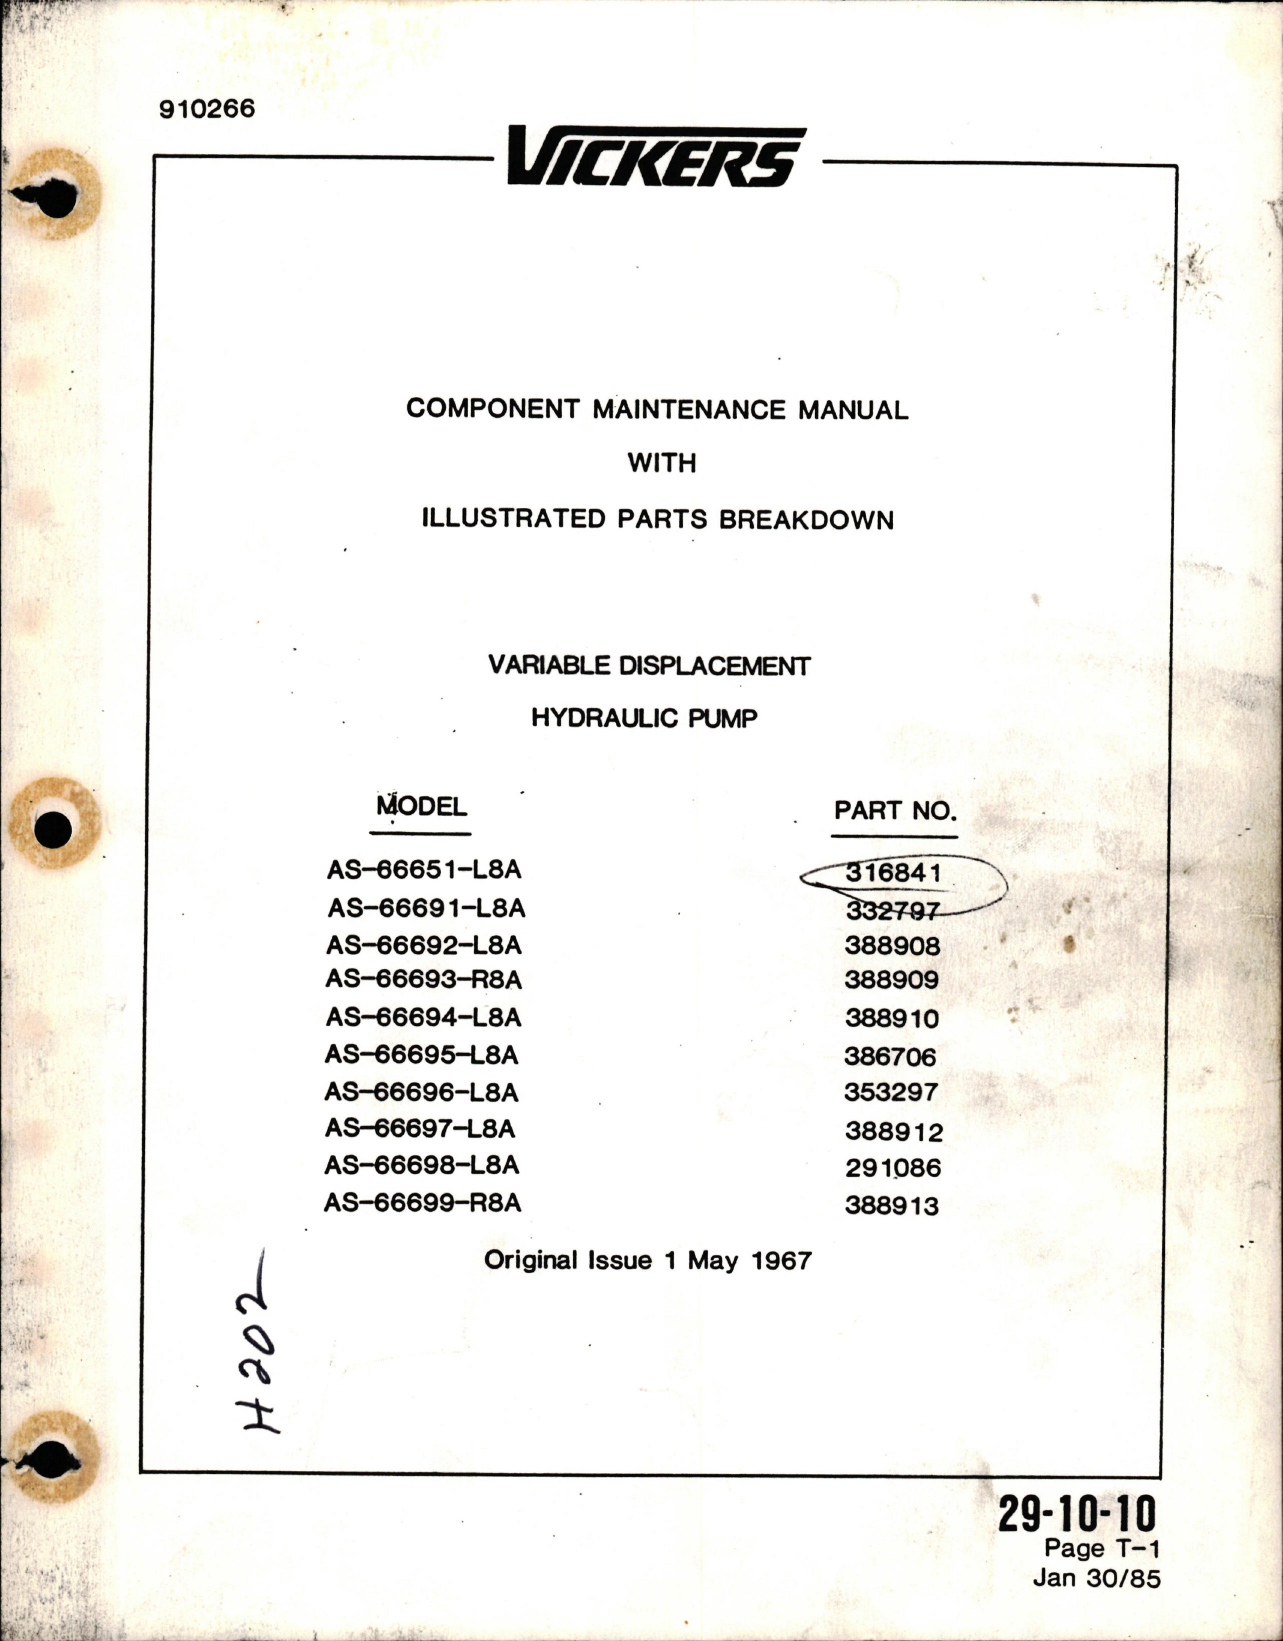 Sample page 1 from AirCorps Library document: Maintenance Manual with Illustrated Parts Breakdown for Variable Displacement Hydraulic Pump